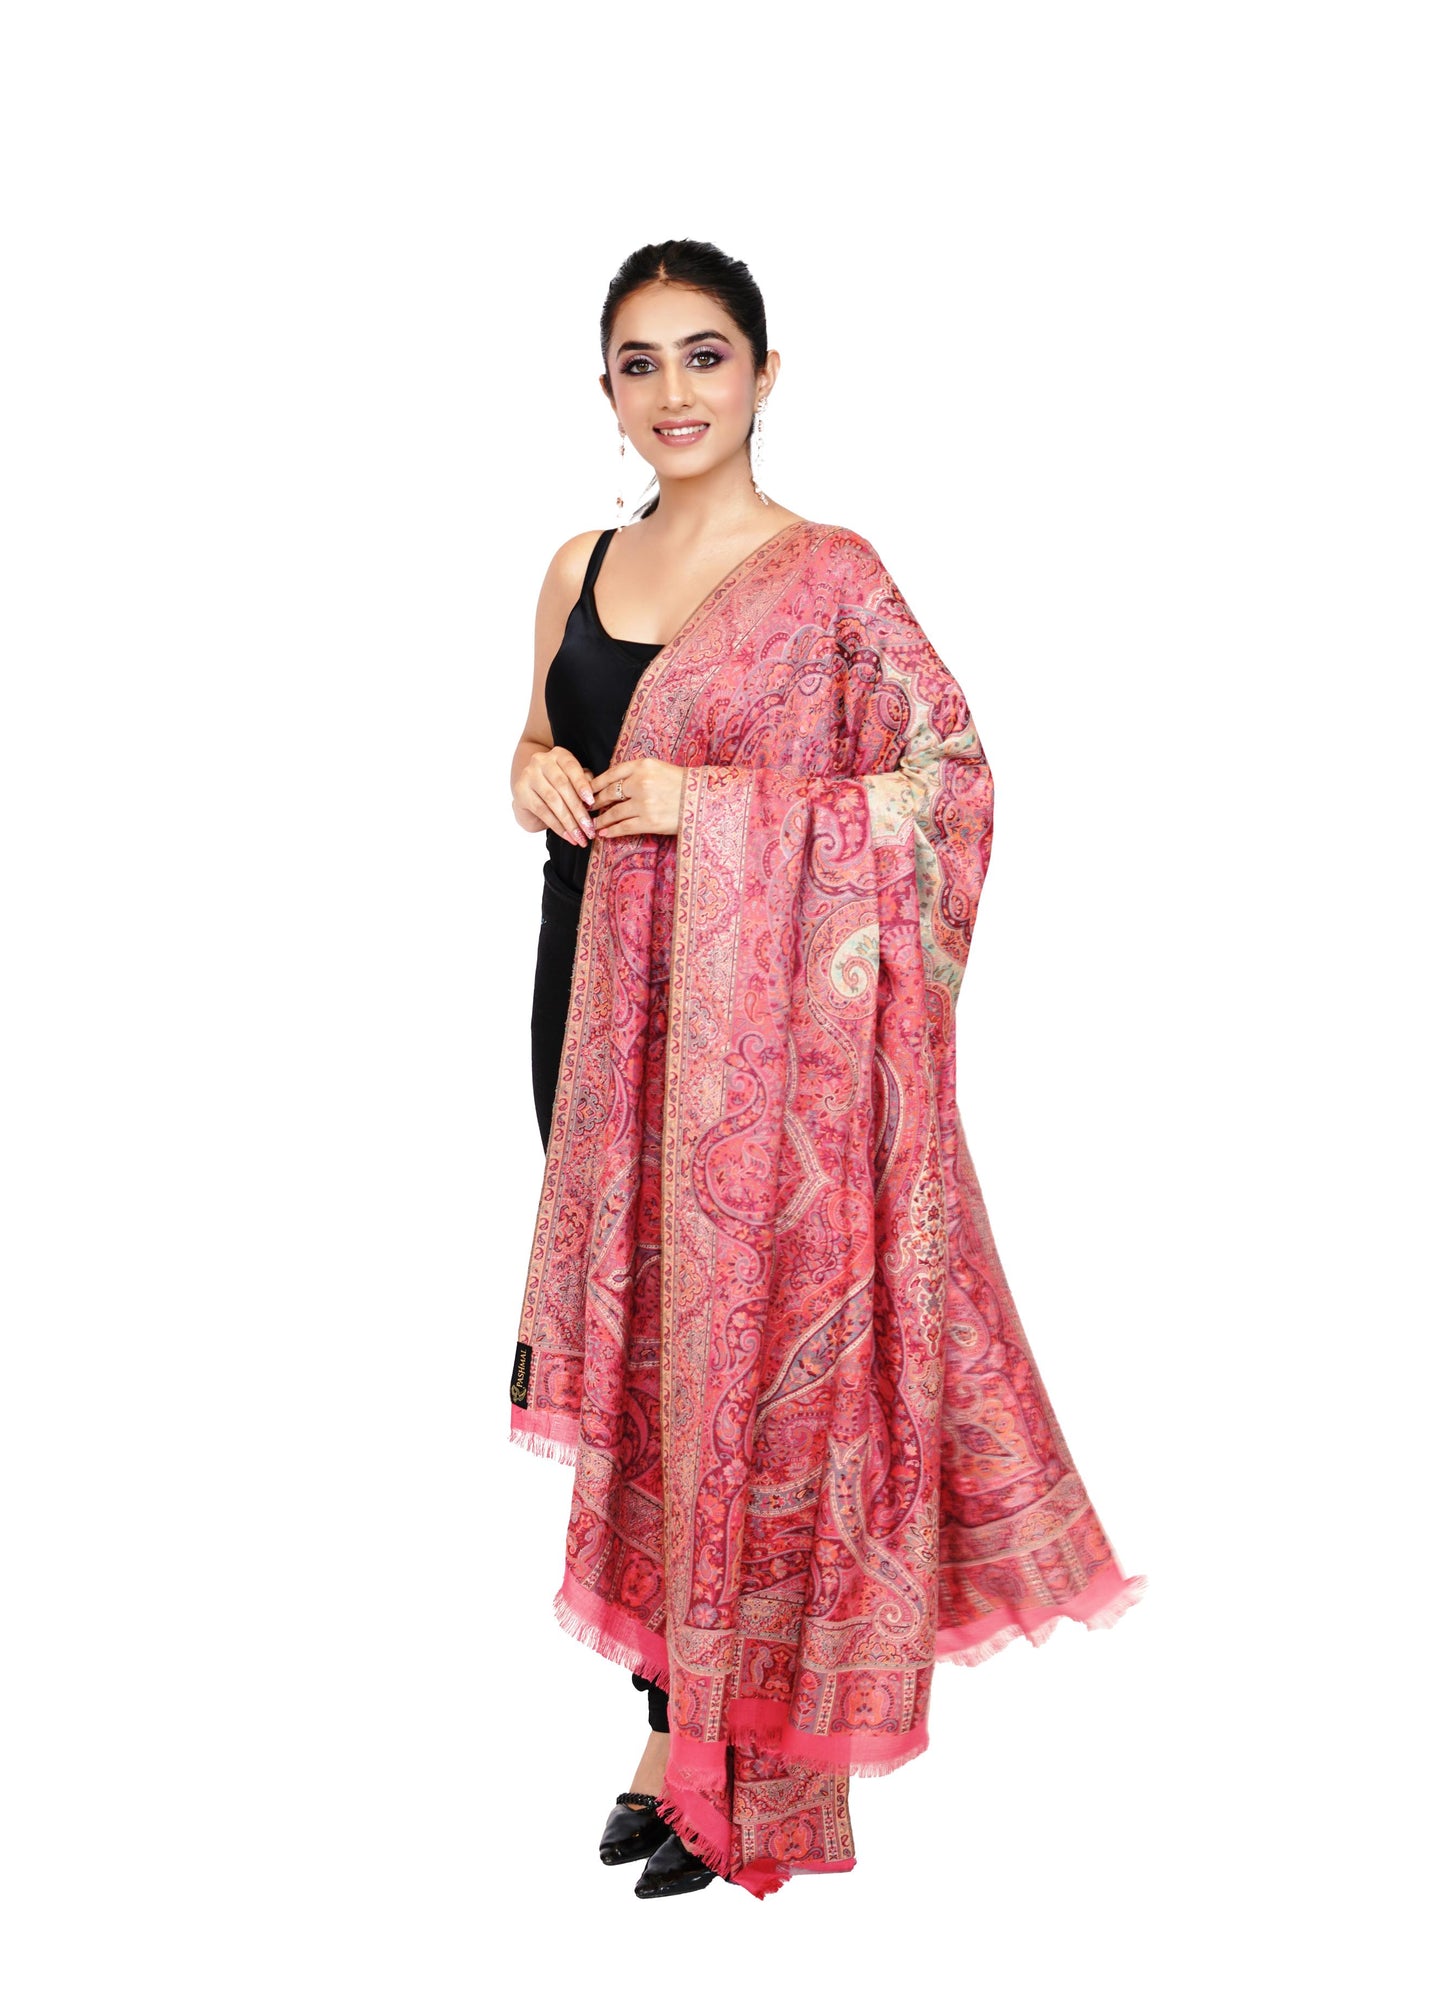 Traditional Bamboo Modal Pink Kani Shawl for Women | Full Size, Soft & Eco-friendly